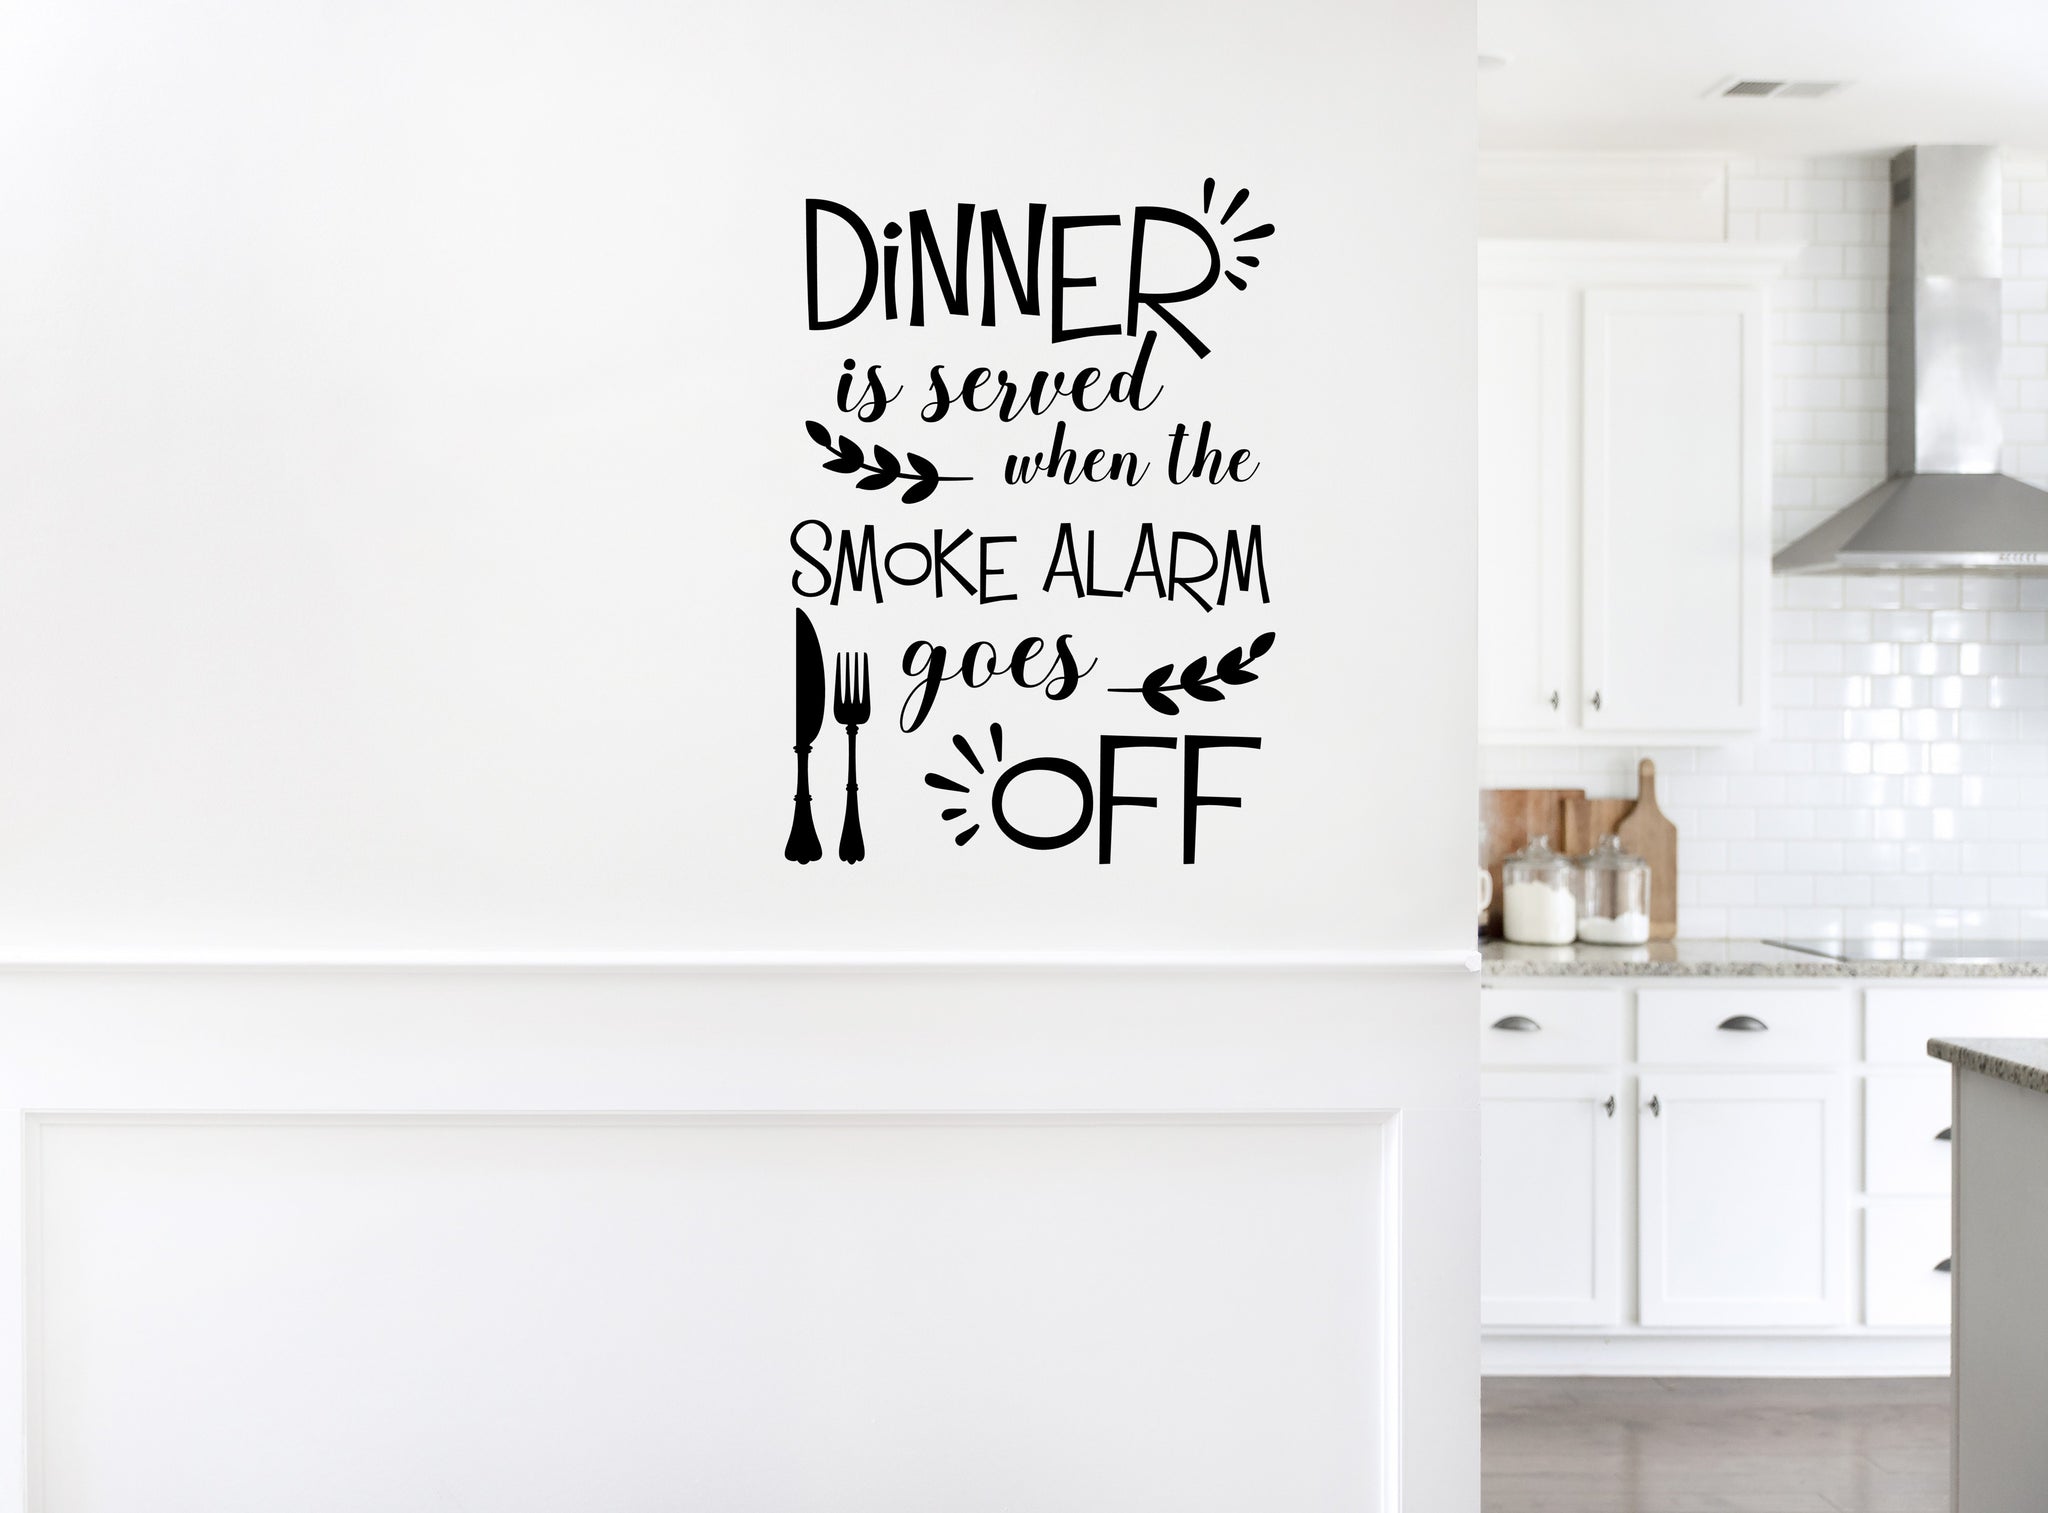 Dinner is served with the smoke alarm goes off - A4 Wall Sticker | Die Cut Sticker